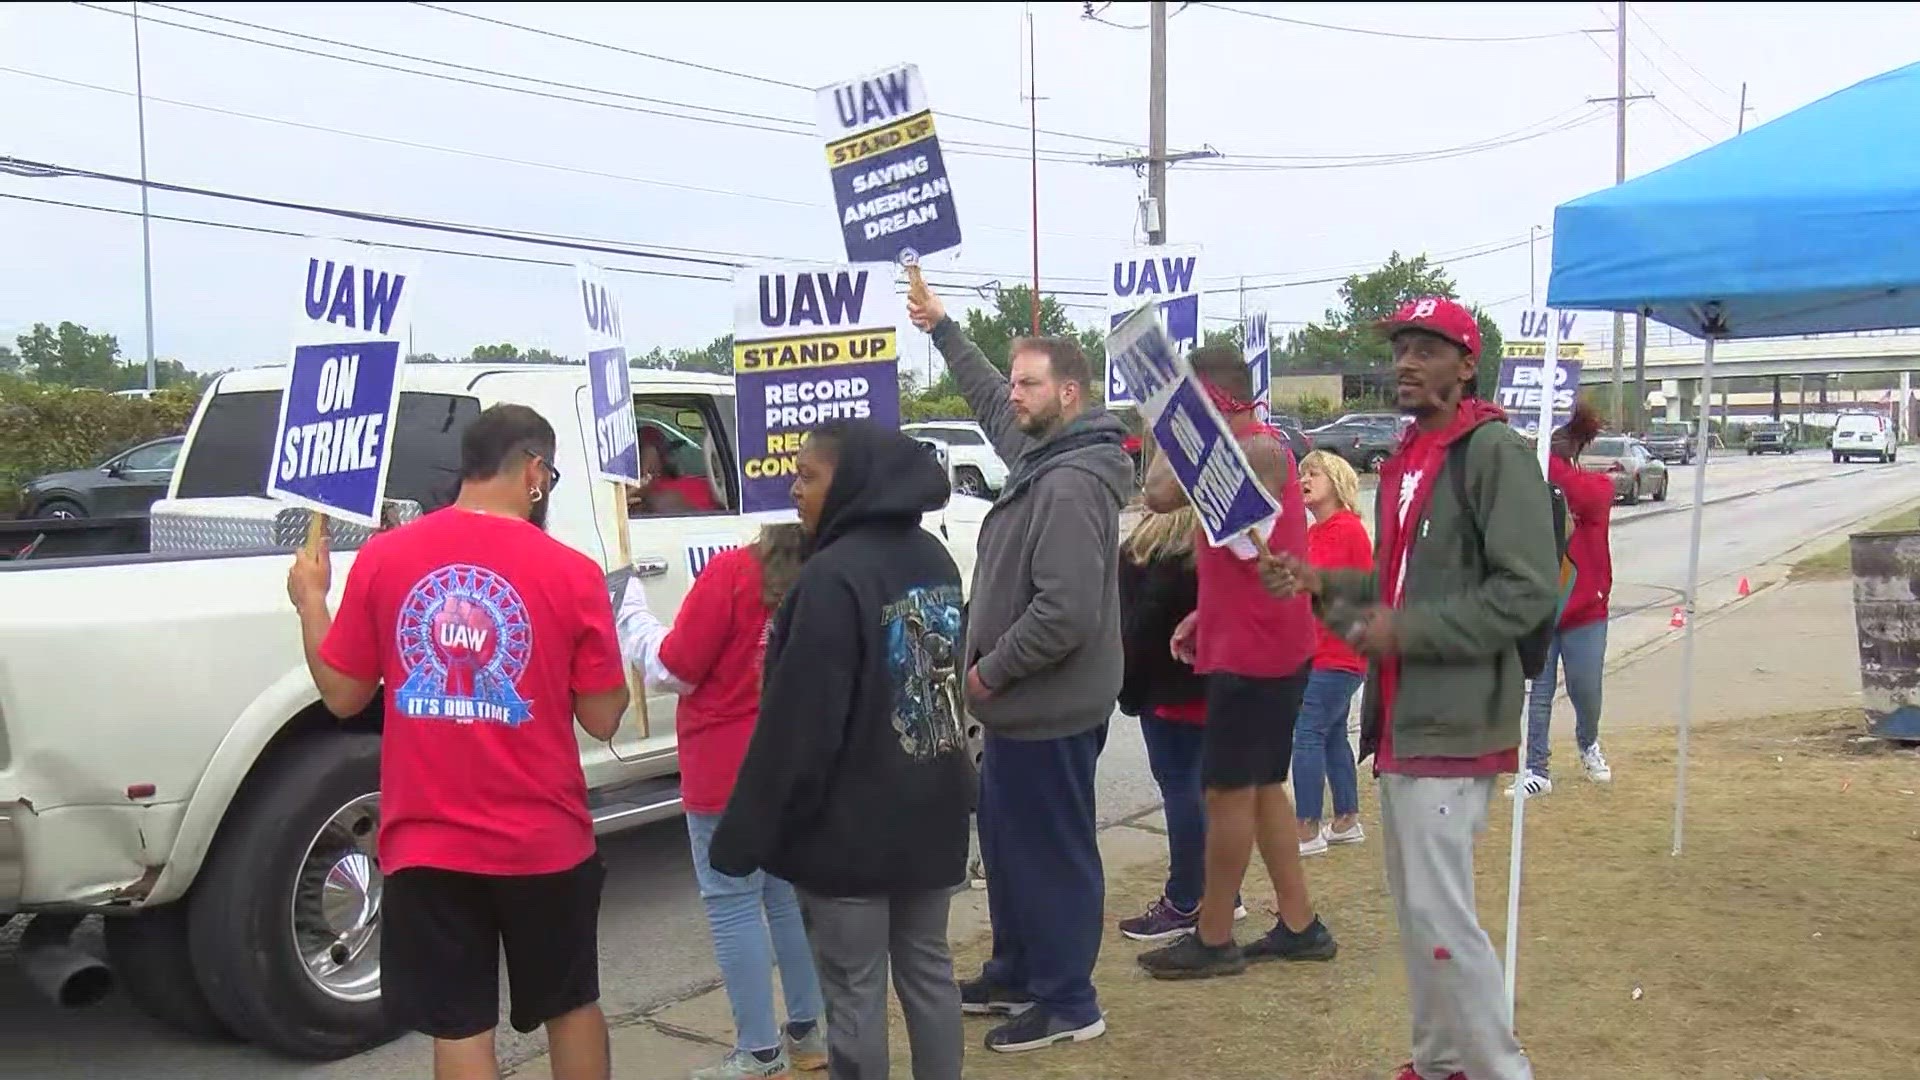 7,000 more workers are off the job in Lansing and Chicago, Shawn Fain also mentioned how President Biden is behind the UAW. Strikers say they are feeling optimistic.